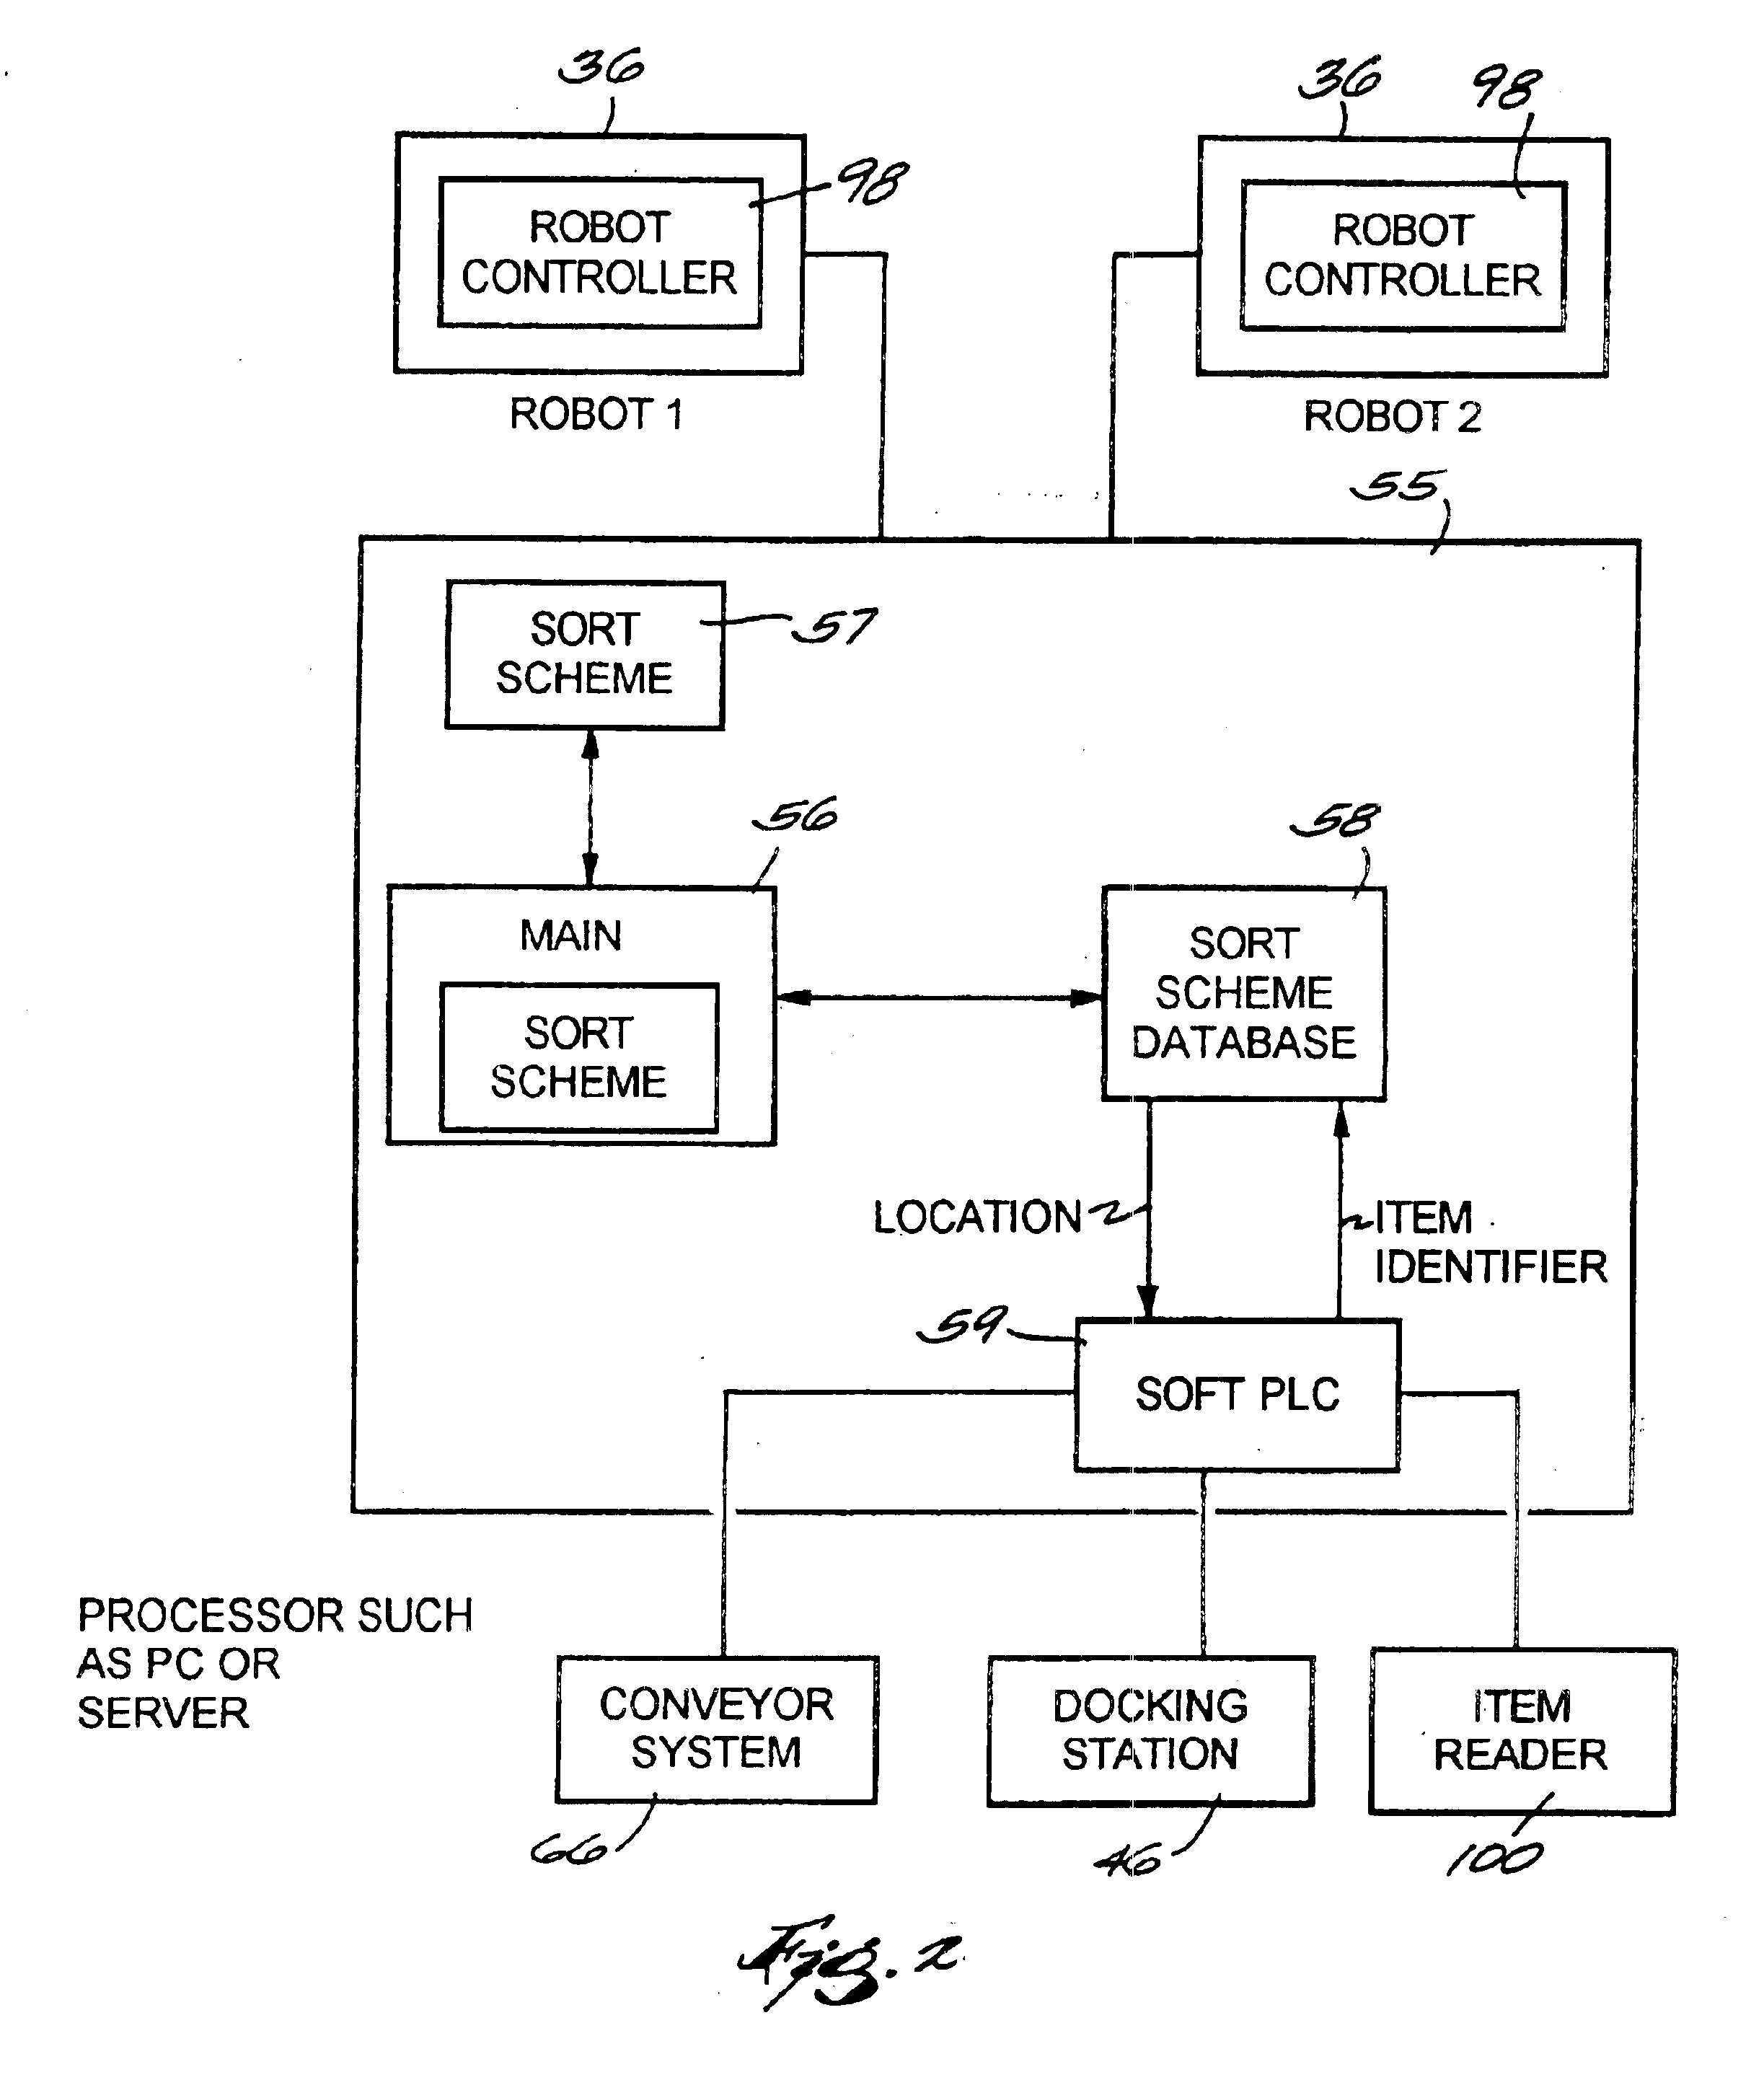 Dynamic sortation of items in a containerization system